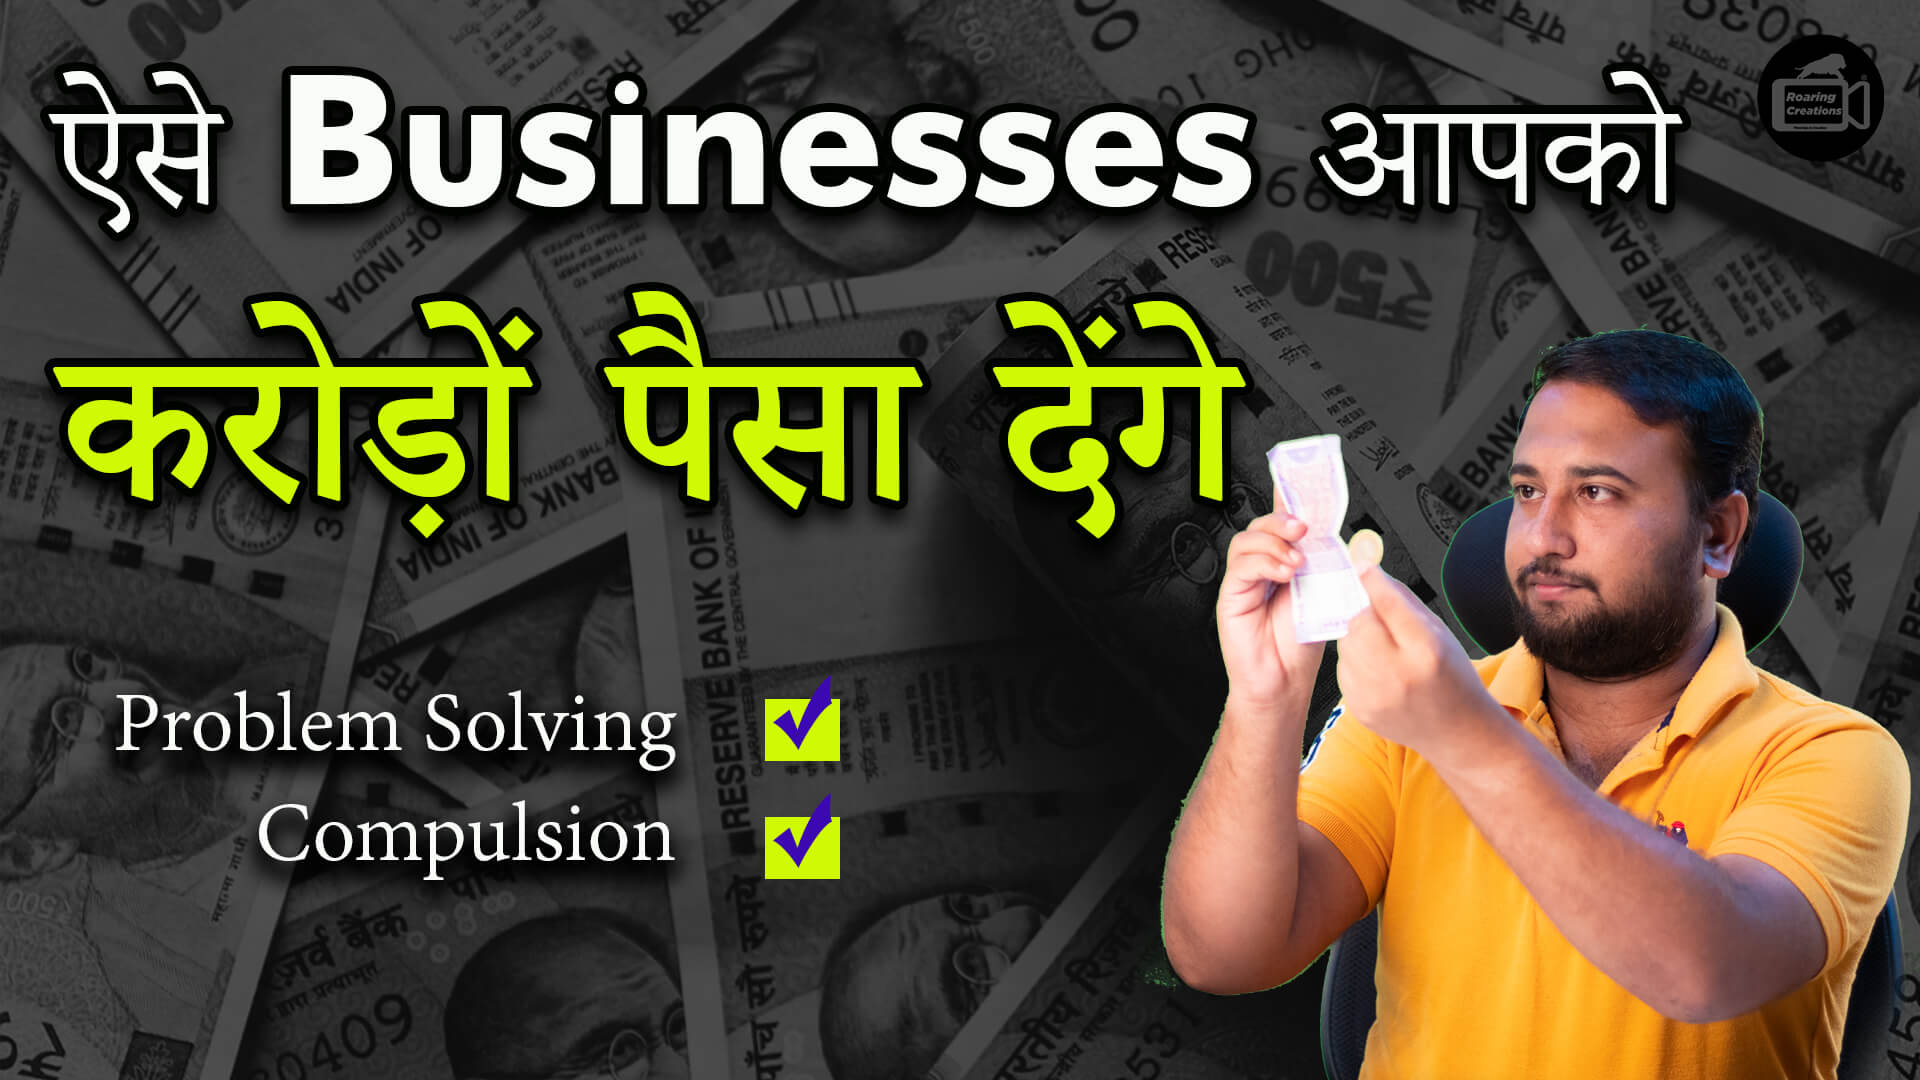 You are currently viewing Lesson – 22: ऐसे Businesses आपको करोड़ों पैसा देंगे – Start Problem Solving Business & Earn in Crores